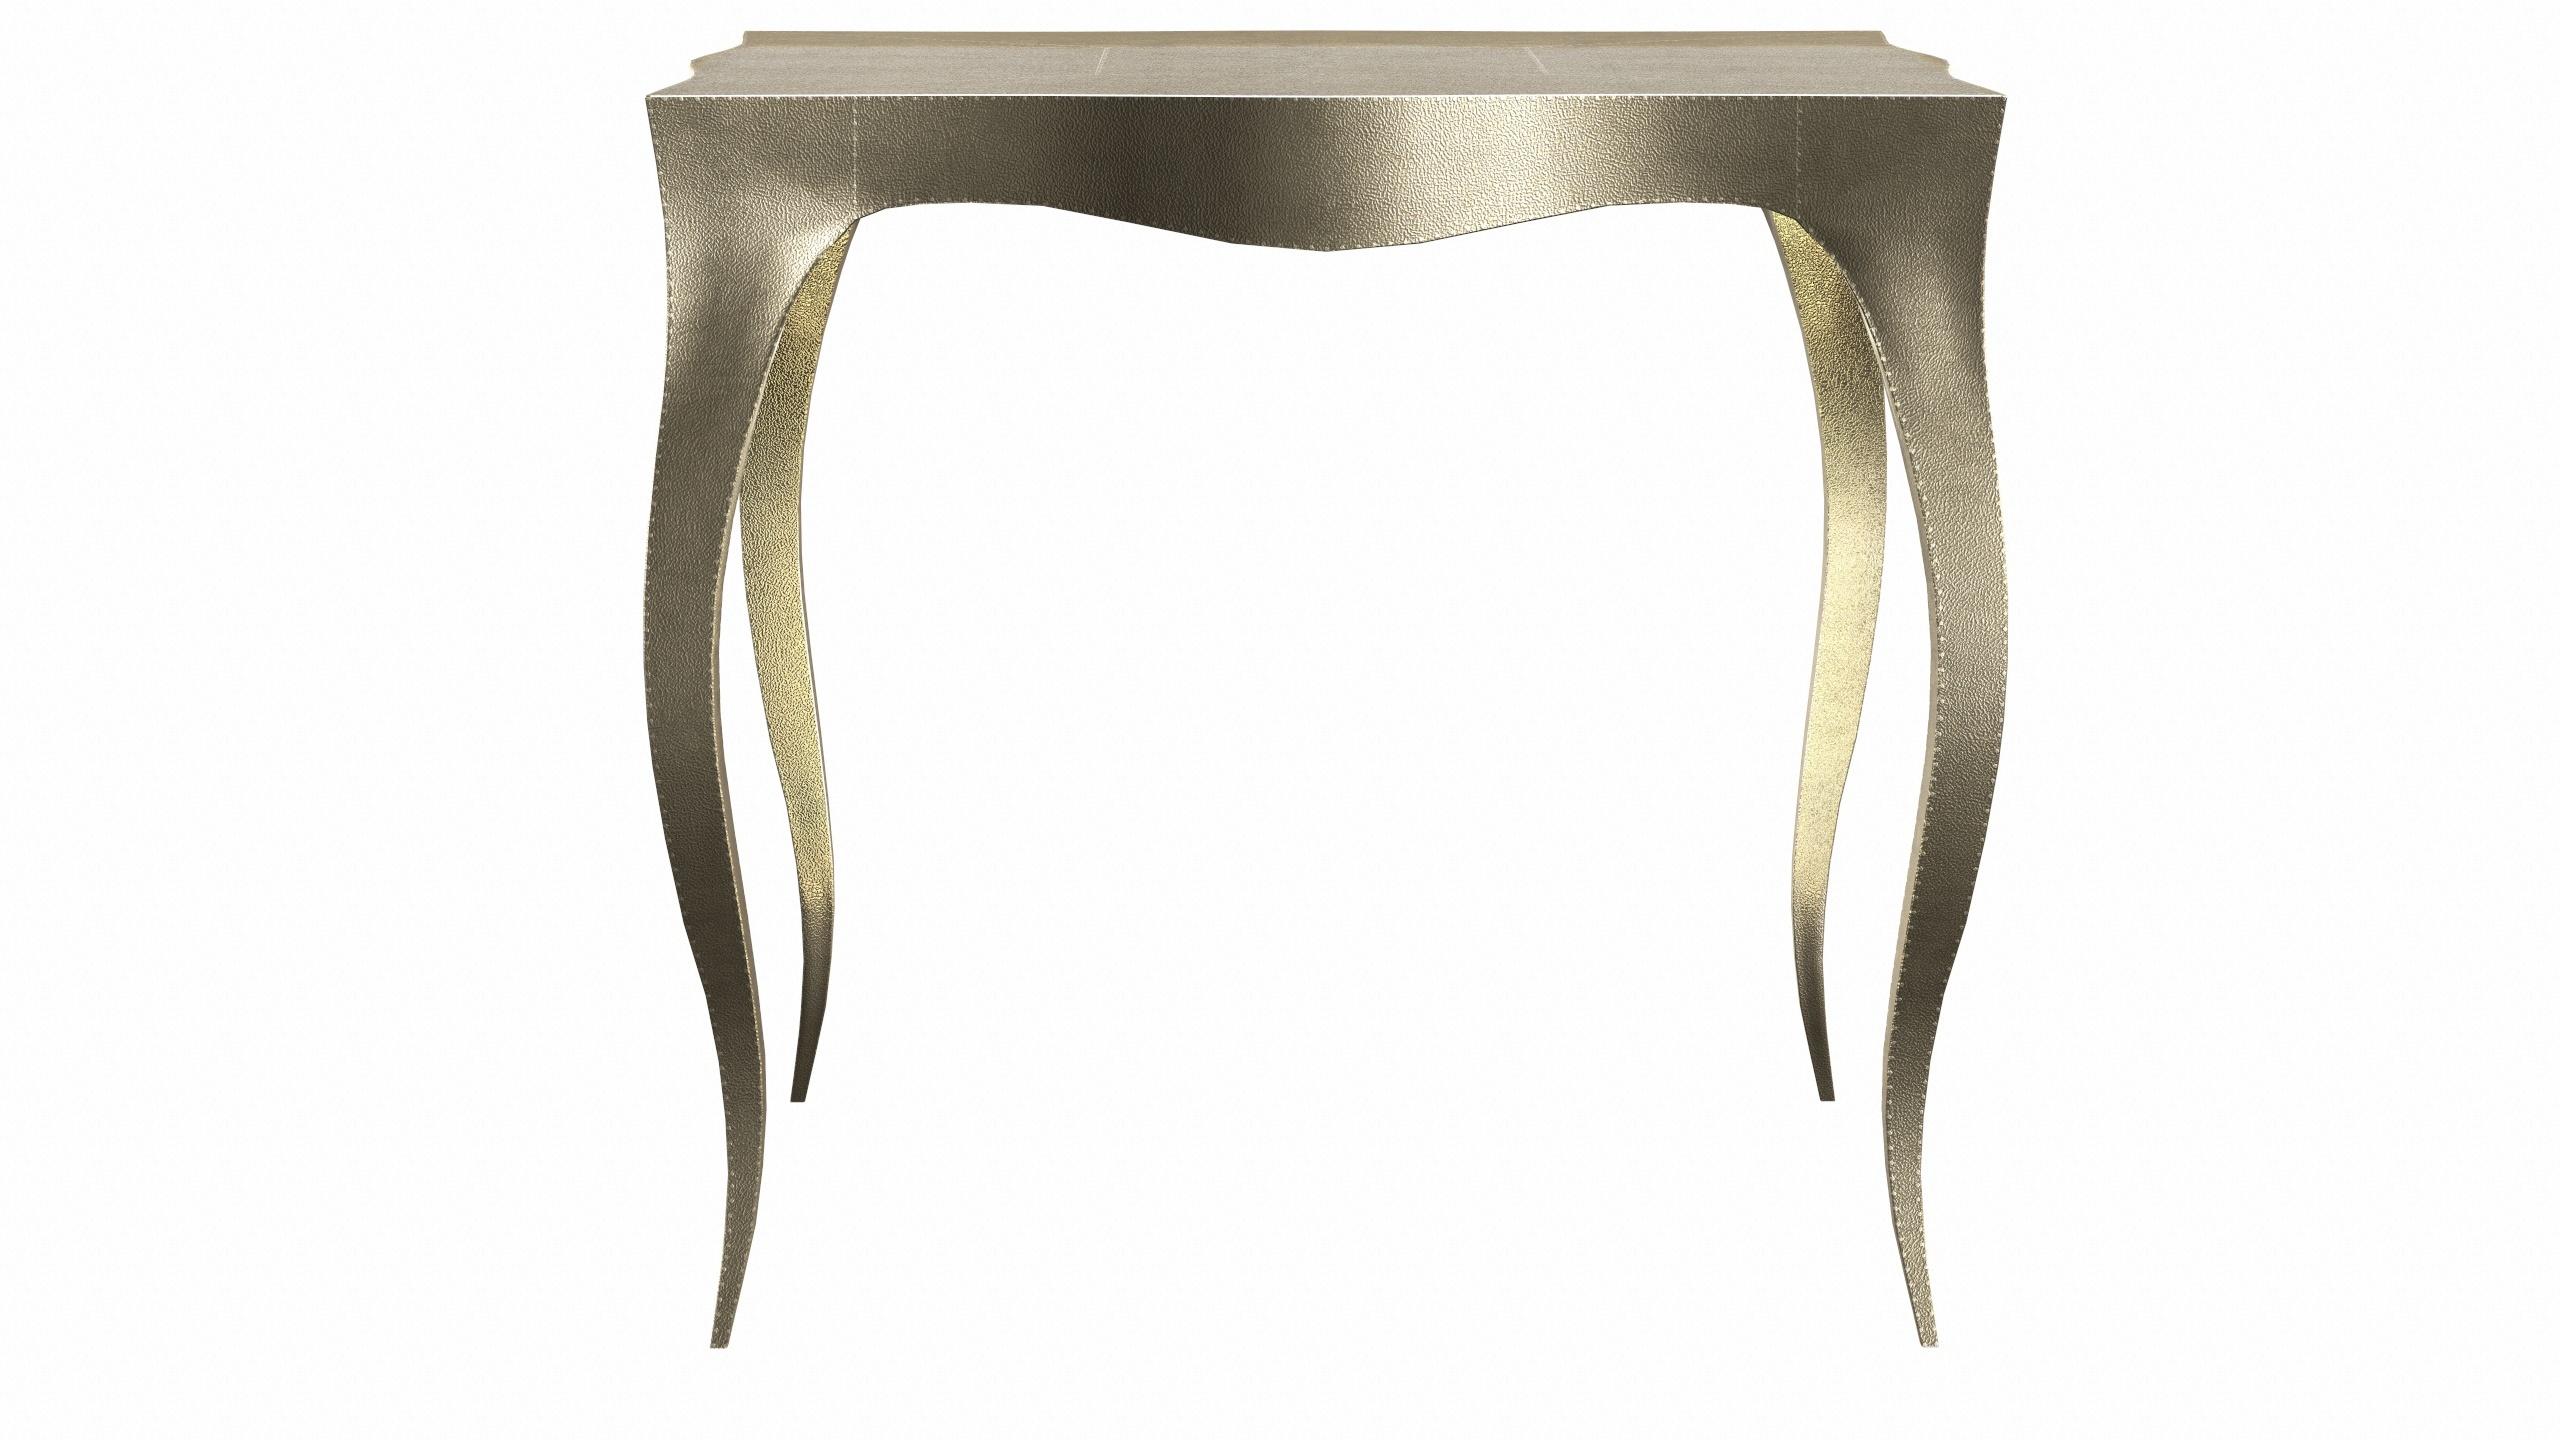 Woodwork Louise Art Deco Nesting Tables and Crad Tables in Fine Hammered Copper by Paul M For Sale